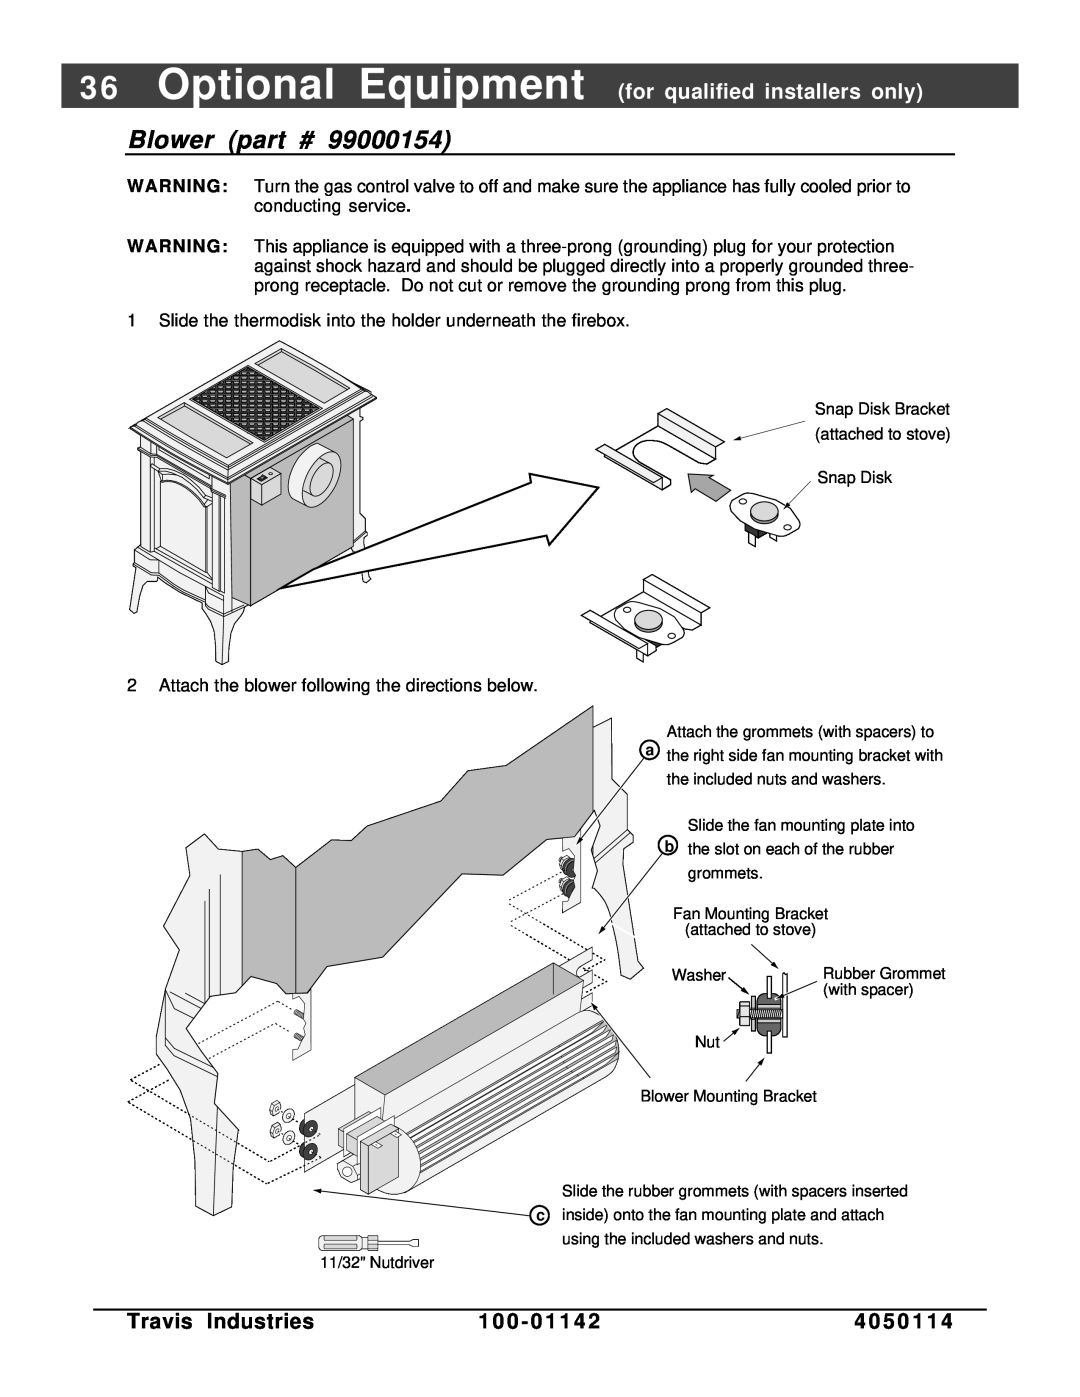 Lopi Direct Vent Freestanding Stove owner manual Blower part #, Travis Industries, 1 0 0, 4 0 5 